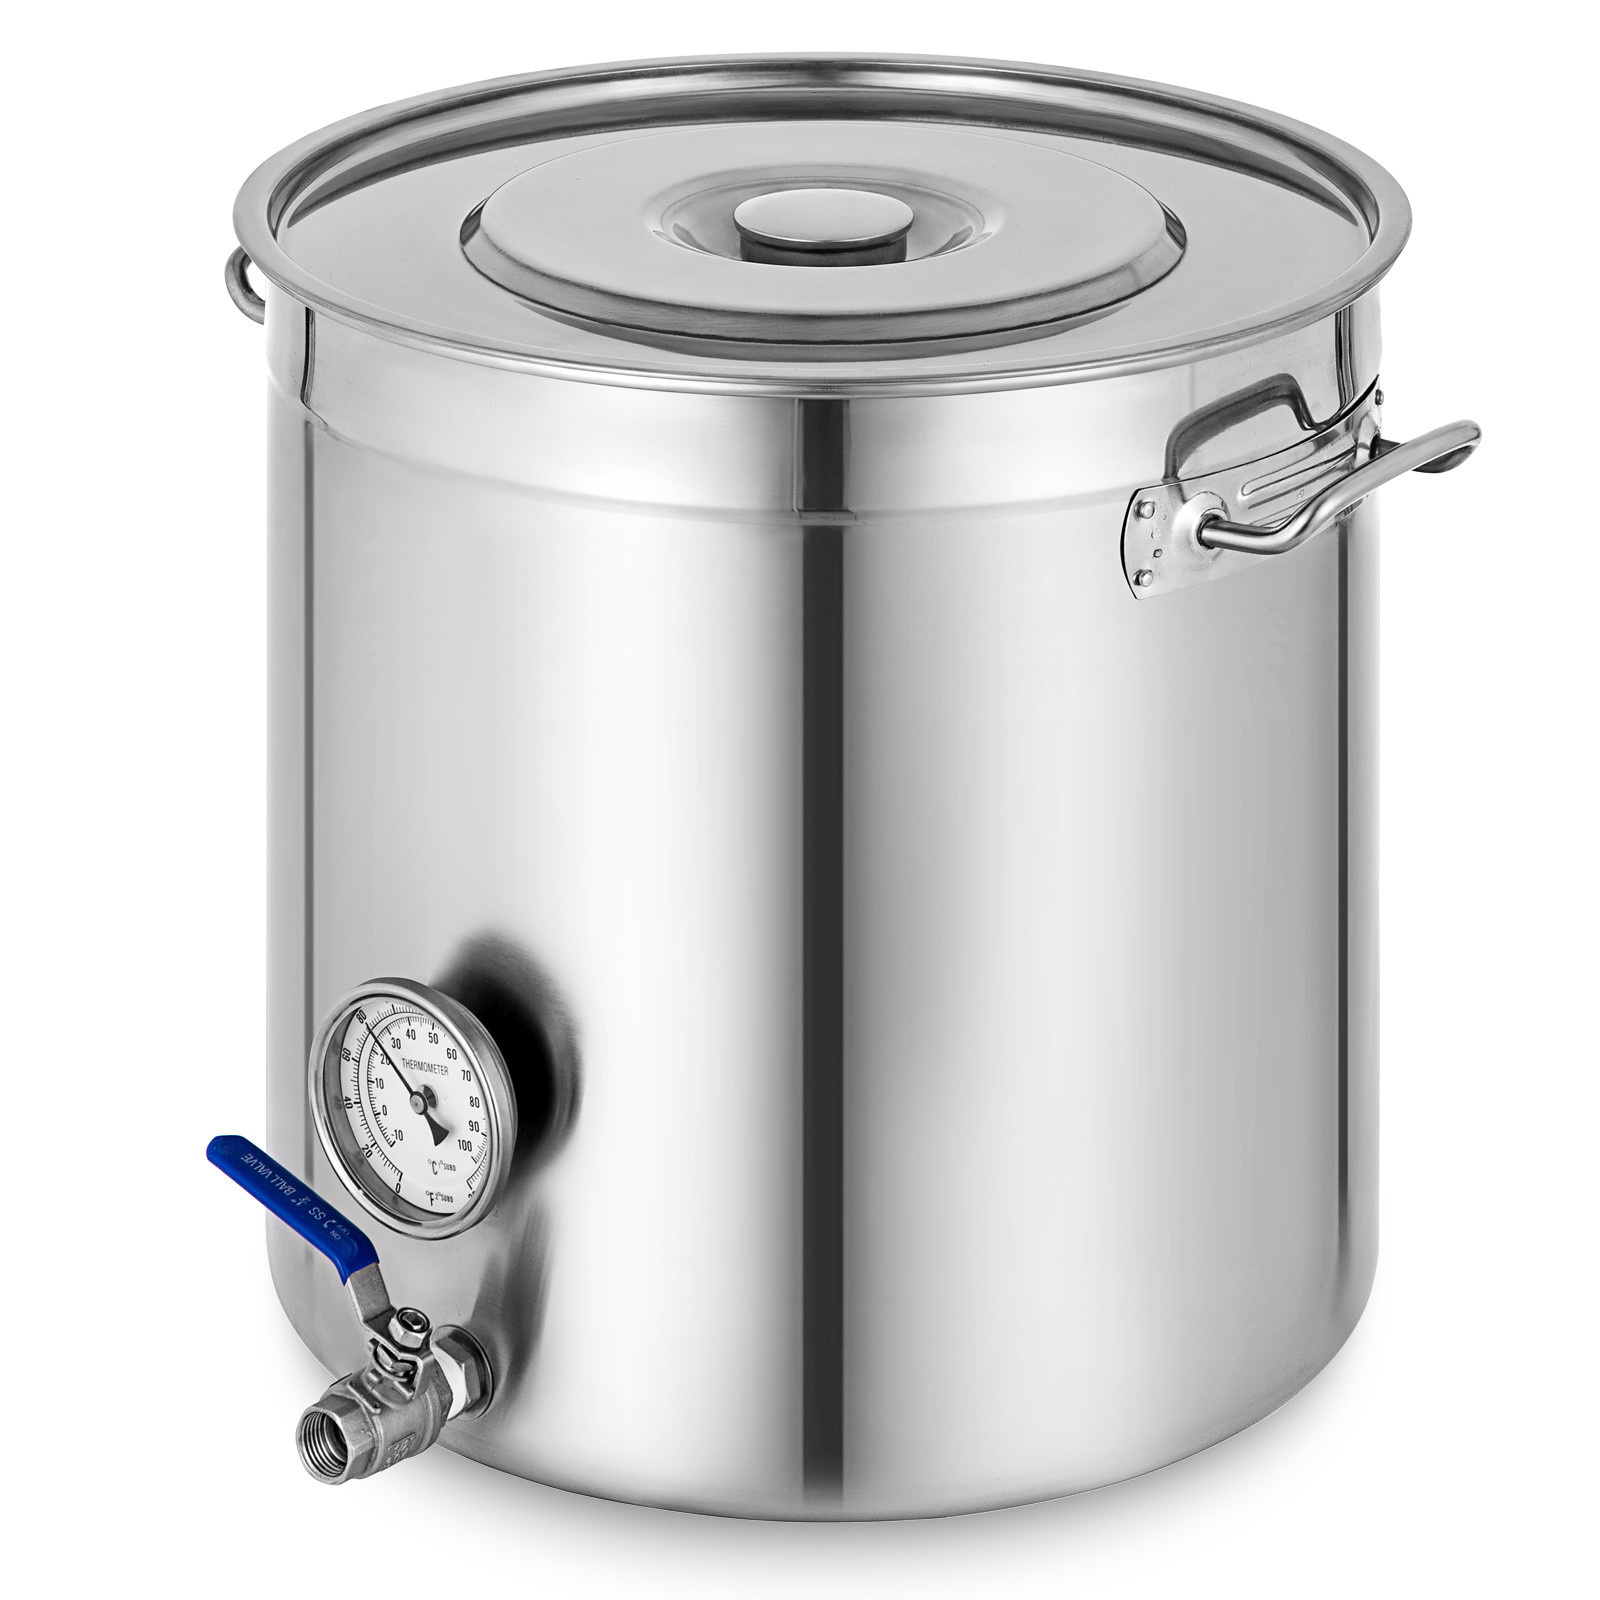 Stainless Steel Stock Pots Commercial